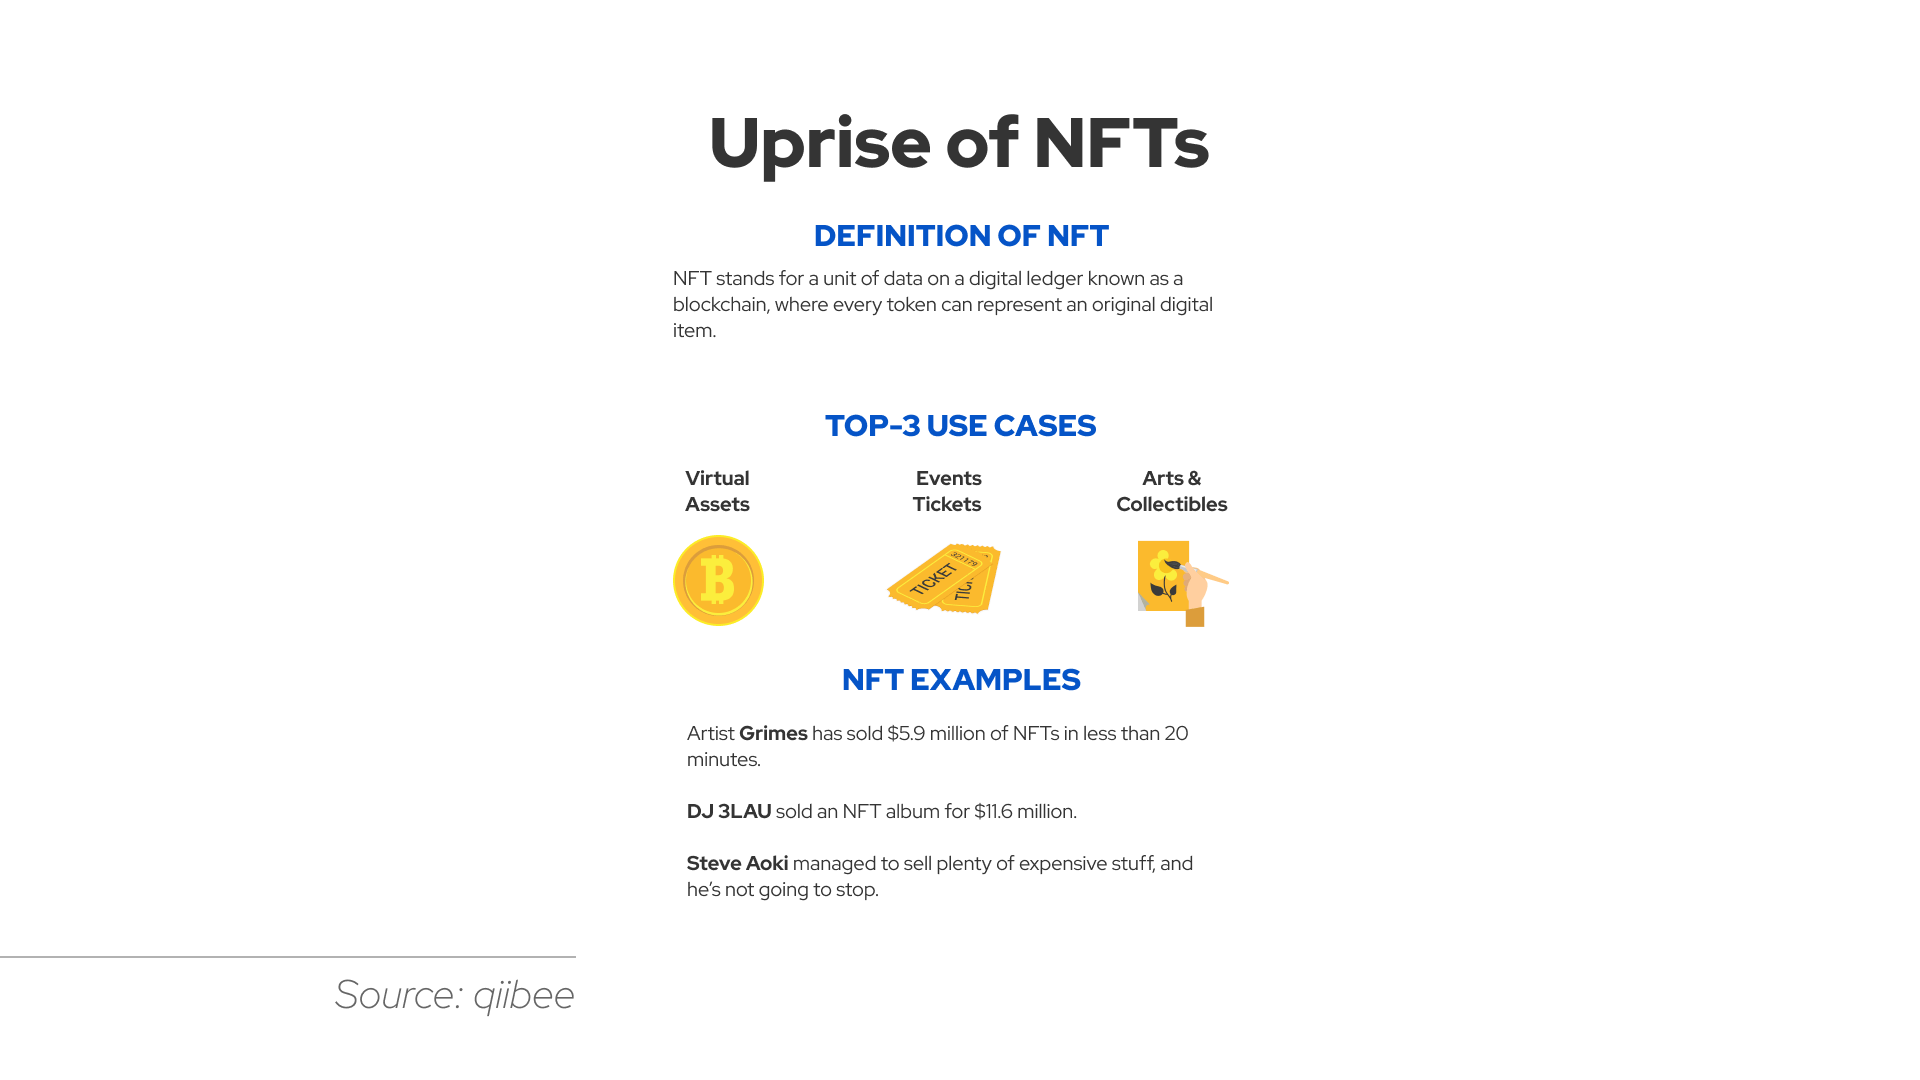 NFTs are one of the new trends in digital media and entertainment, allowing to make good money on different digital artworks, such as images, videos, or GIFs.